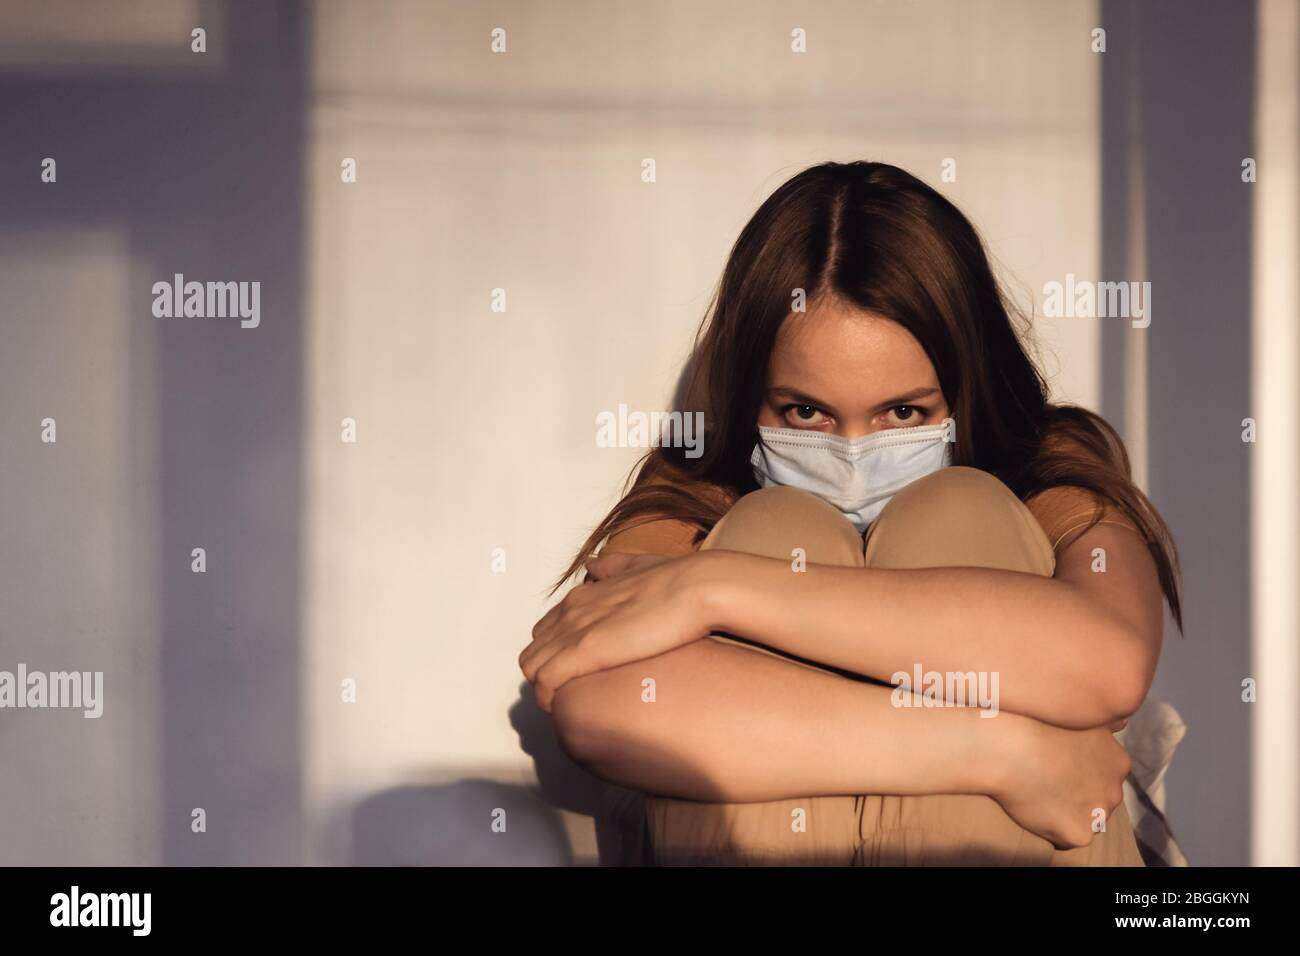 Sad girl in medical protective mask and yellow T-shirt sitting on the bed and looking into the camera. Covid-19 coronavirus pandemic. Isolation at hom Stock Photo